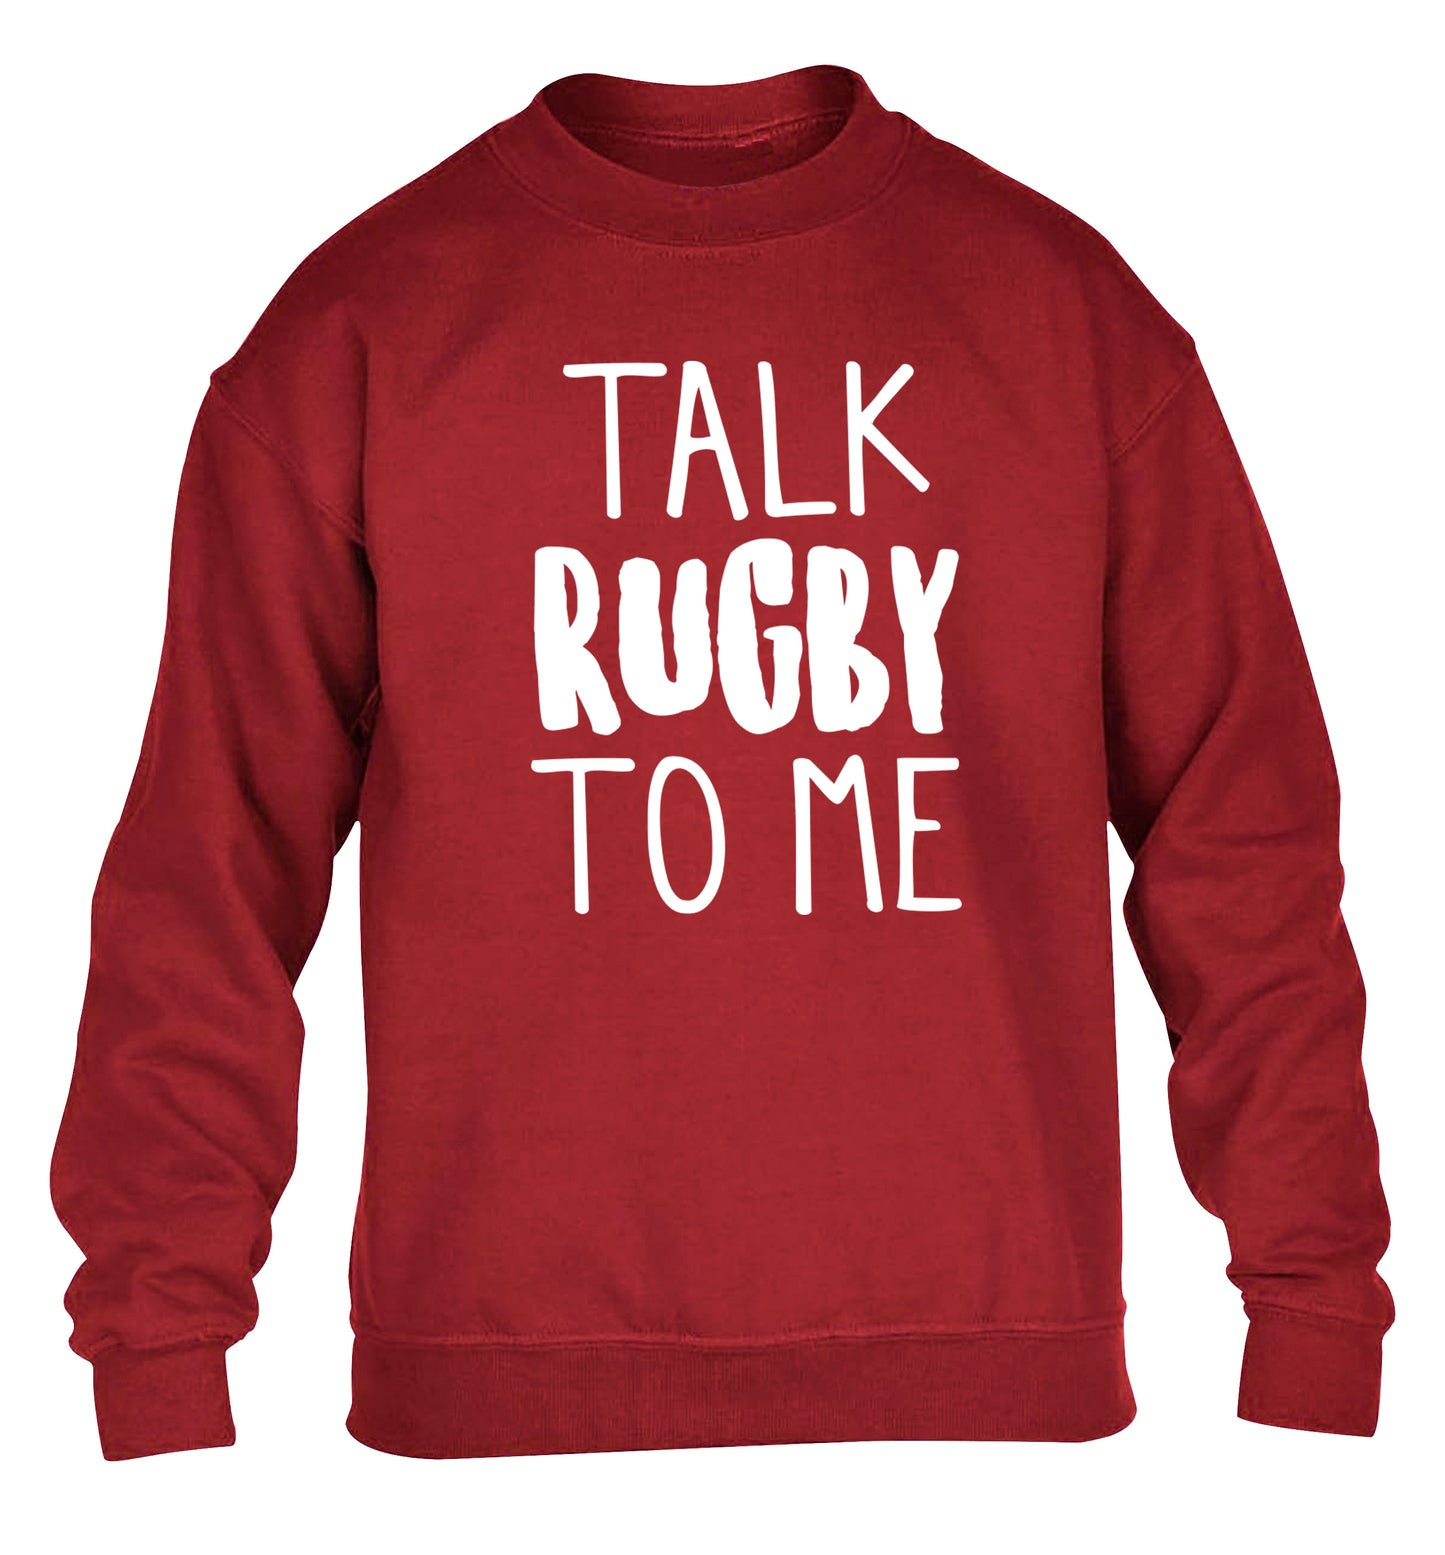 Talk rugby to me children's grey sweater 12-13 Years